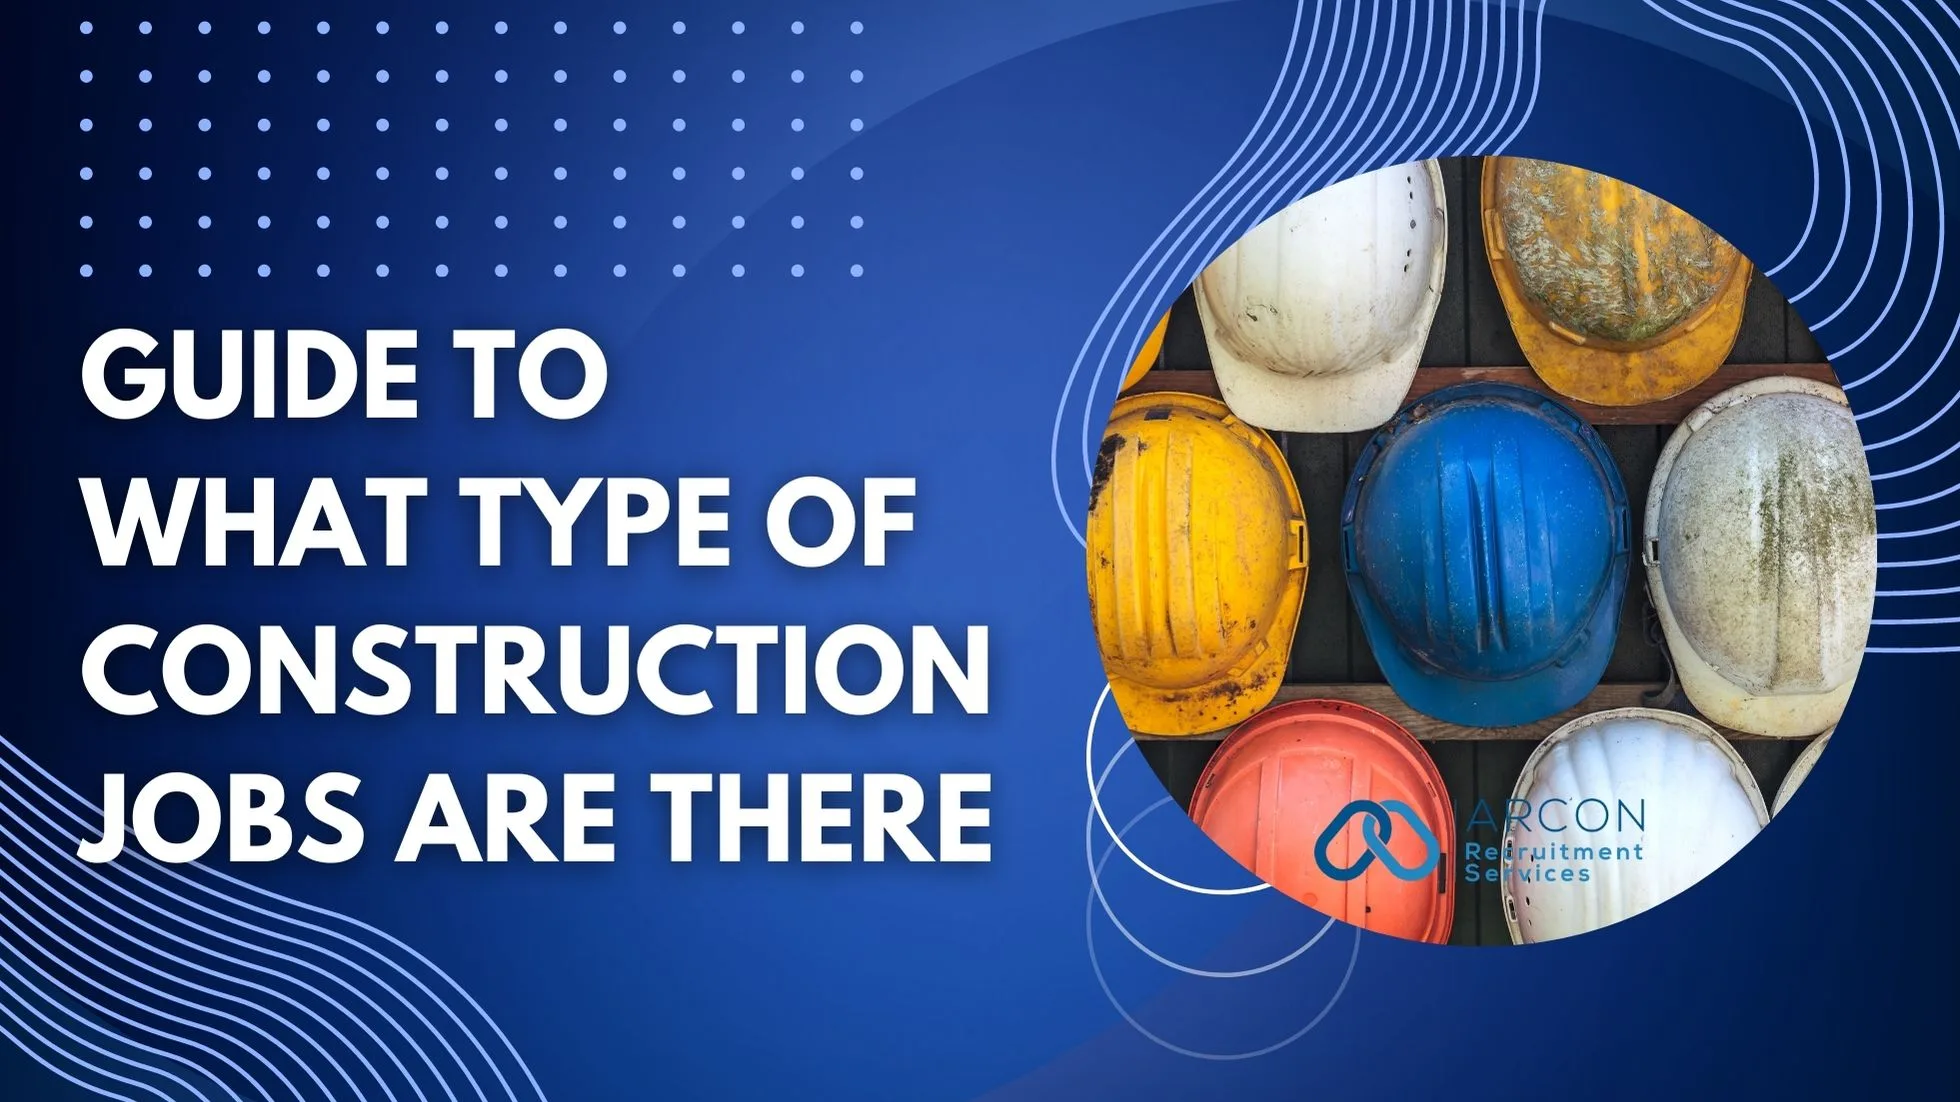 Guide to What type of Construction Jobs are there with Arcon REcruitment